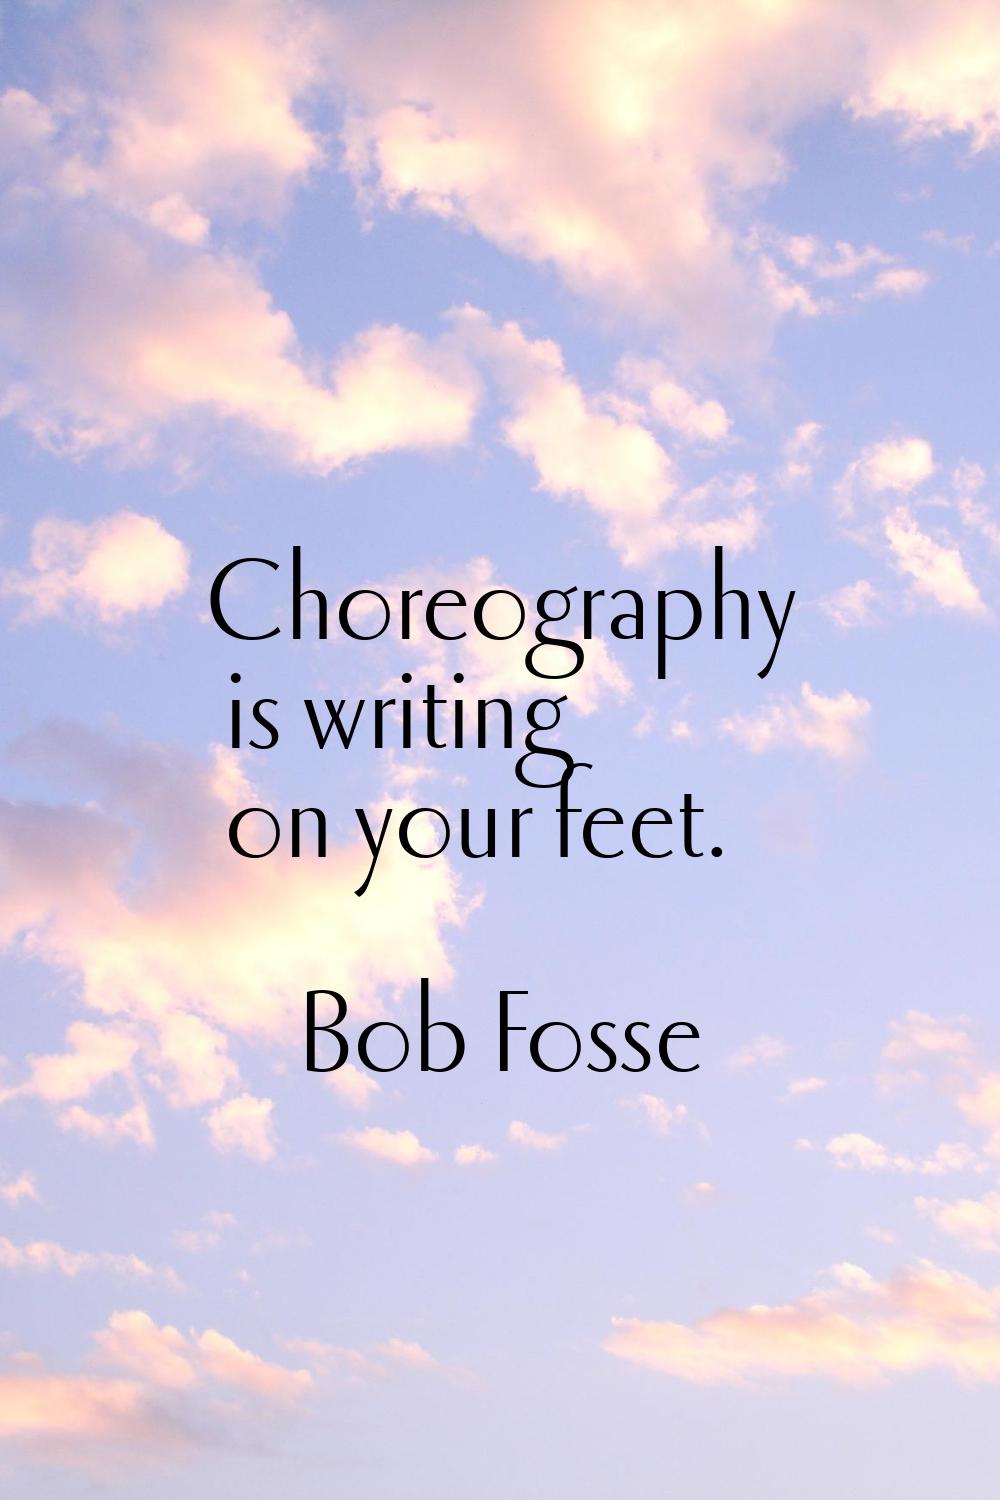 Choreography is writing on your feet.